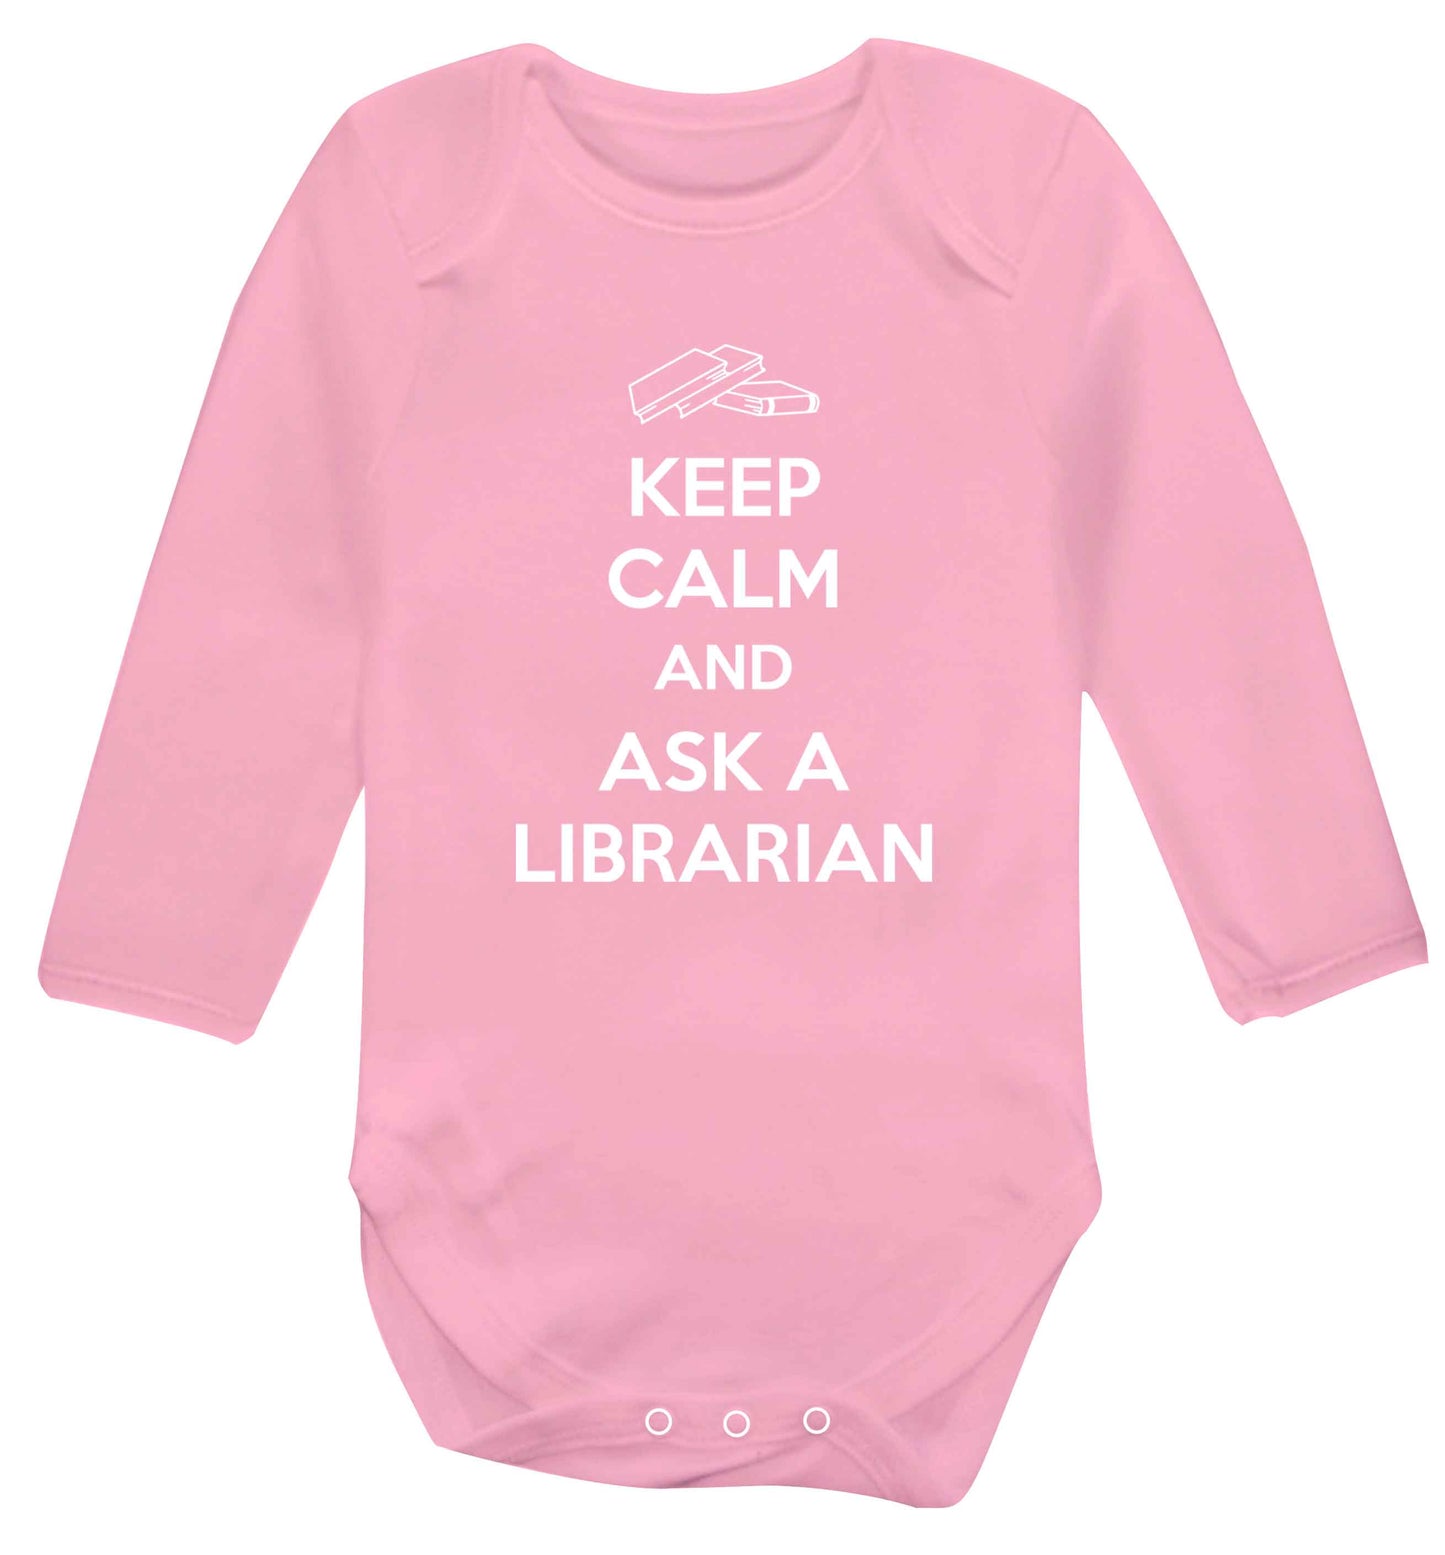 Keep calm and ask a librarian Baby Vest long sleeved pale pink 6-12 months